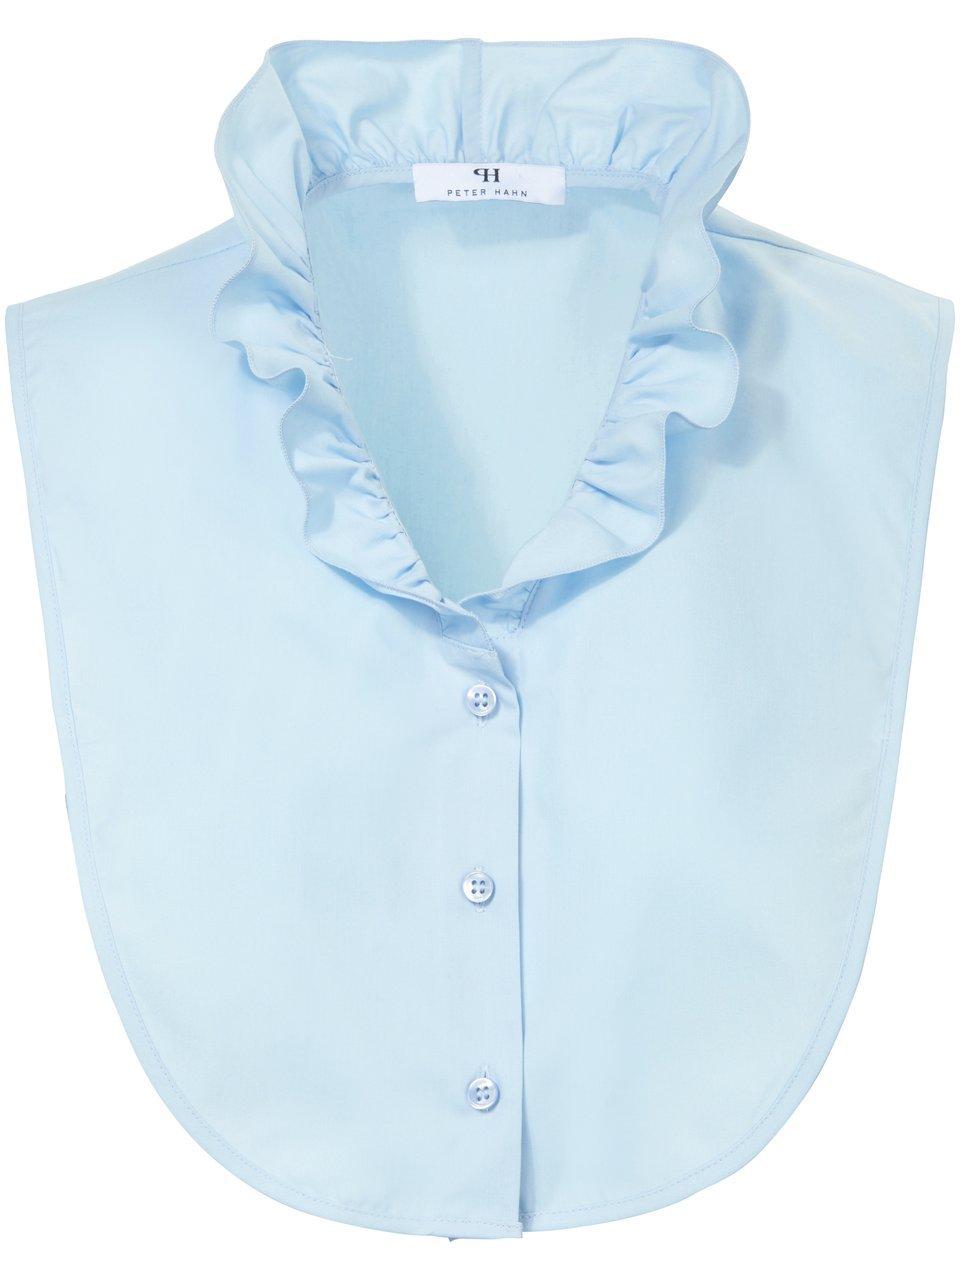 Image of Blouse collar in 100% cotton Peter Hahn blue